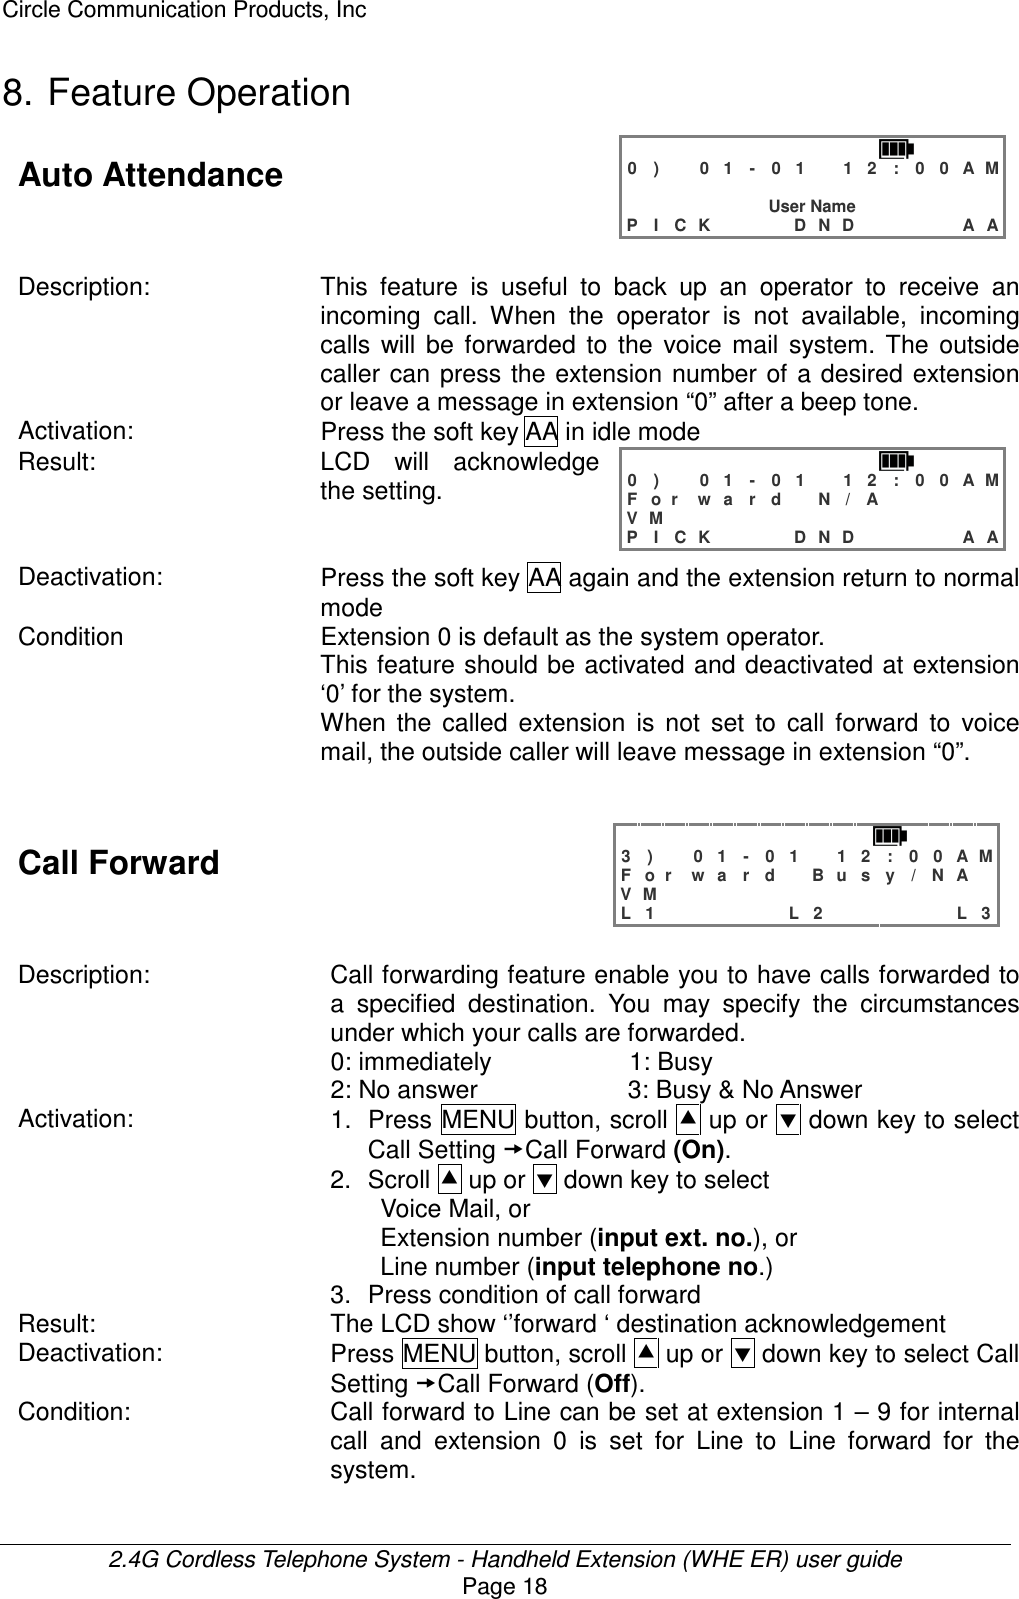 Circle Communication Products, Inc  2.4G Cordless Telephone System - Handheld Extension (WHE ER) user guide Page 18 8. Feature Operation Auto Attendance   0 )   0 1 - 0 1  1 2 : 0 0 A M                 User Name P I C K    D N D     A A  Description: This  feature  is  useful  to  back  up  an  operator  to  receive  an incoming  call.  When  the  operator  is  not  available,  incoming calls  will  be  forwarded  to  the  voice  mail  system.  The  outside caller can  press  the  extension  number  of  a desired extension or leave a message in extension “0” after a beep tone. Activation:  Press the soft key AA in idle mode Result: LCD  will  acknowledge the setting.   0 )   0 1 - 0 1  1 2 : 0 0 A M F o r w a r d  N / A      V M               P I C K    D N D     A A  Deactivation:  Press the soft key AA again and the extension return to normal mode Condition    Extension 0 is default as the system operator. This feature should be activated and deactivated at extension ‘0’ for the system. When  the  called  extension  is  not  set  to  call  forward  to  voice mail, the outside caller will leave message in extension “0”.   Call Forward   3 )   0 1 - 0 1  1 2 : 0 0 A M F o r w a r d  B u s y / N A  V M               L 1      L 2      L 3  Description:  Call forwarding feature enable you to have calls forwarded to a  specified  destination.  You  may  specify  the  circumstances under which your calls are forwarded.   0: immediately                      1: Busy 2: No answer                        3: Busy &amp; No Answer Activation:  1.  Press MENU button, scroll  up or  down key to select Call Setting Call Forward (On). 2.  Scroll  up or  down key to select   Voice Mail, or Extension number (input ext. no.), or   Line number (input telephone no.) 3.  Press condition of call forward   Result:  The LCD show ‘’forward ‘ destination acknowledgement Deactivation:  Press MENU button, scroll  up or  down key to select Call Setting Call Forward (Off). Condition:  Call forward to Line can be set at extension 1 – 9 for internal call  and  extension  0  is  set  for  Line  to  Line  forward  for  the system.  